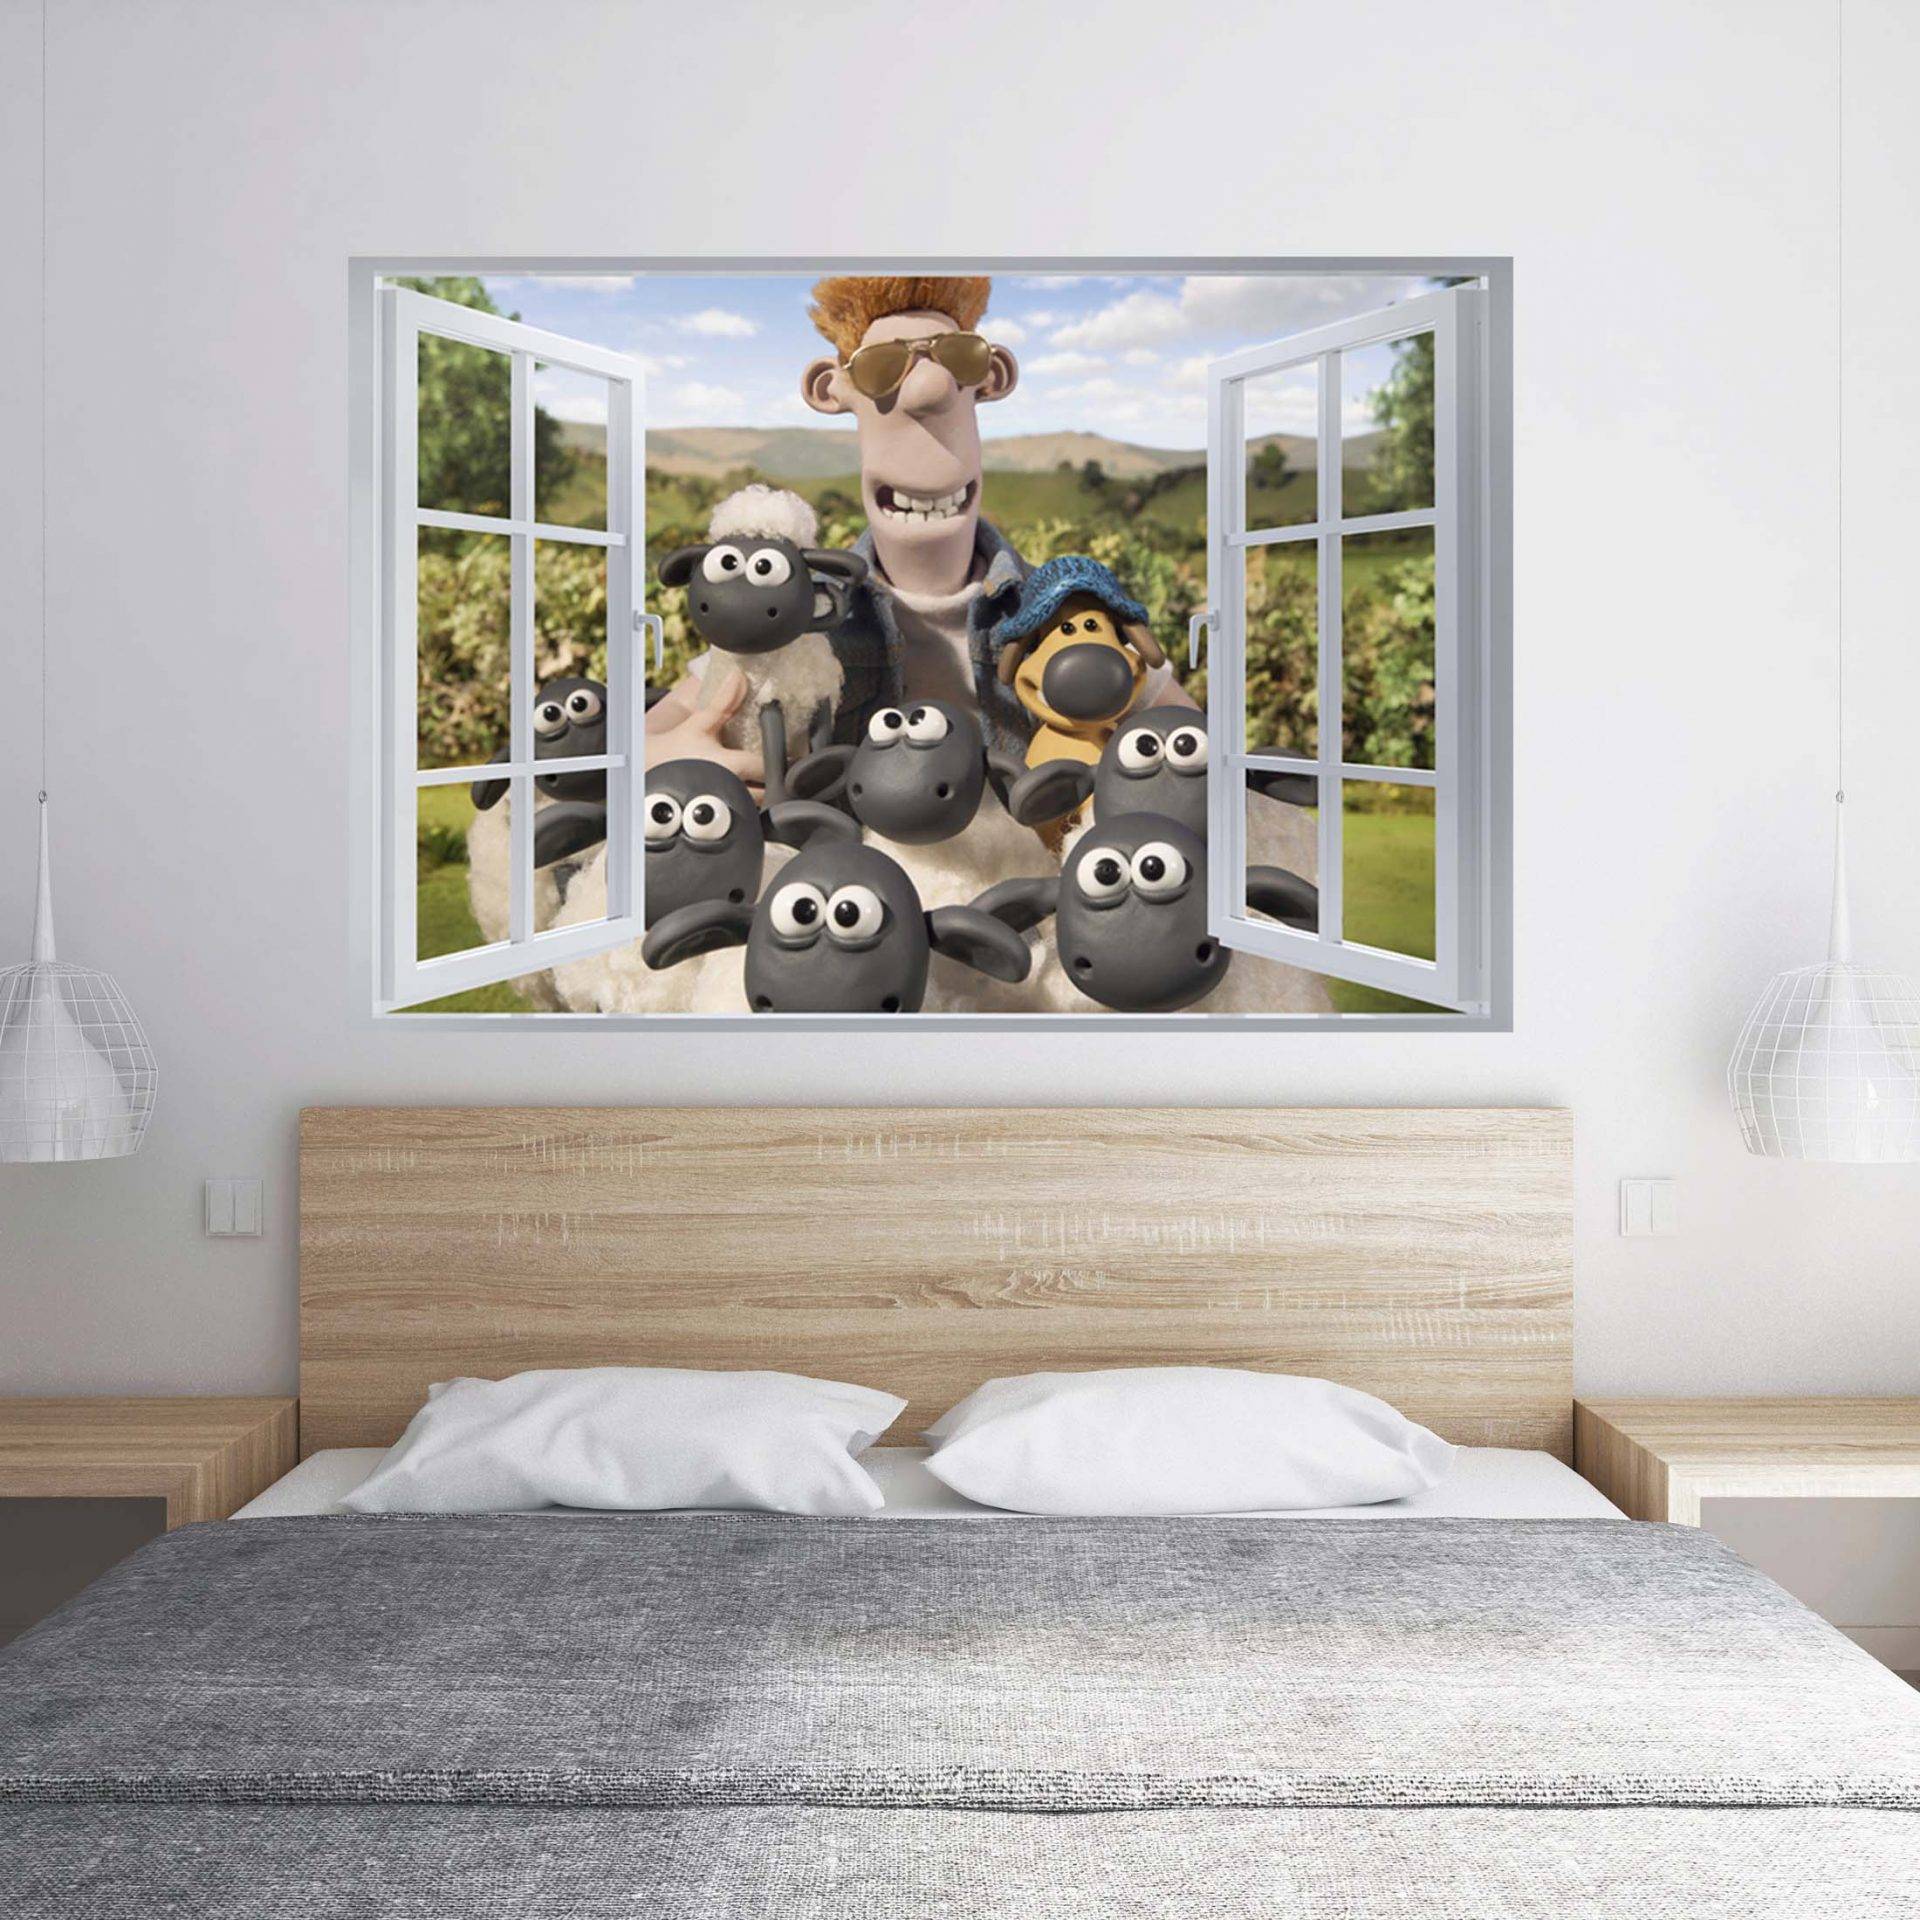 Shawn the Sheep 3D Window Wall Decals kids Nursery Stickers Party Decor Gift Art 